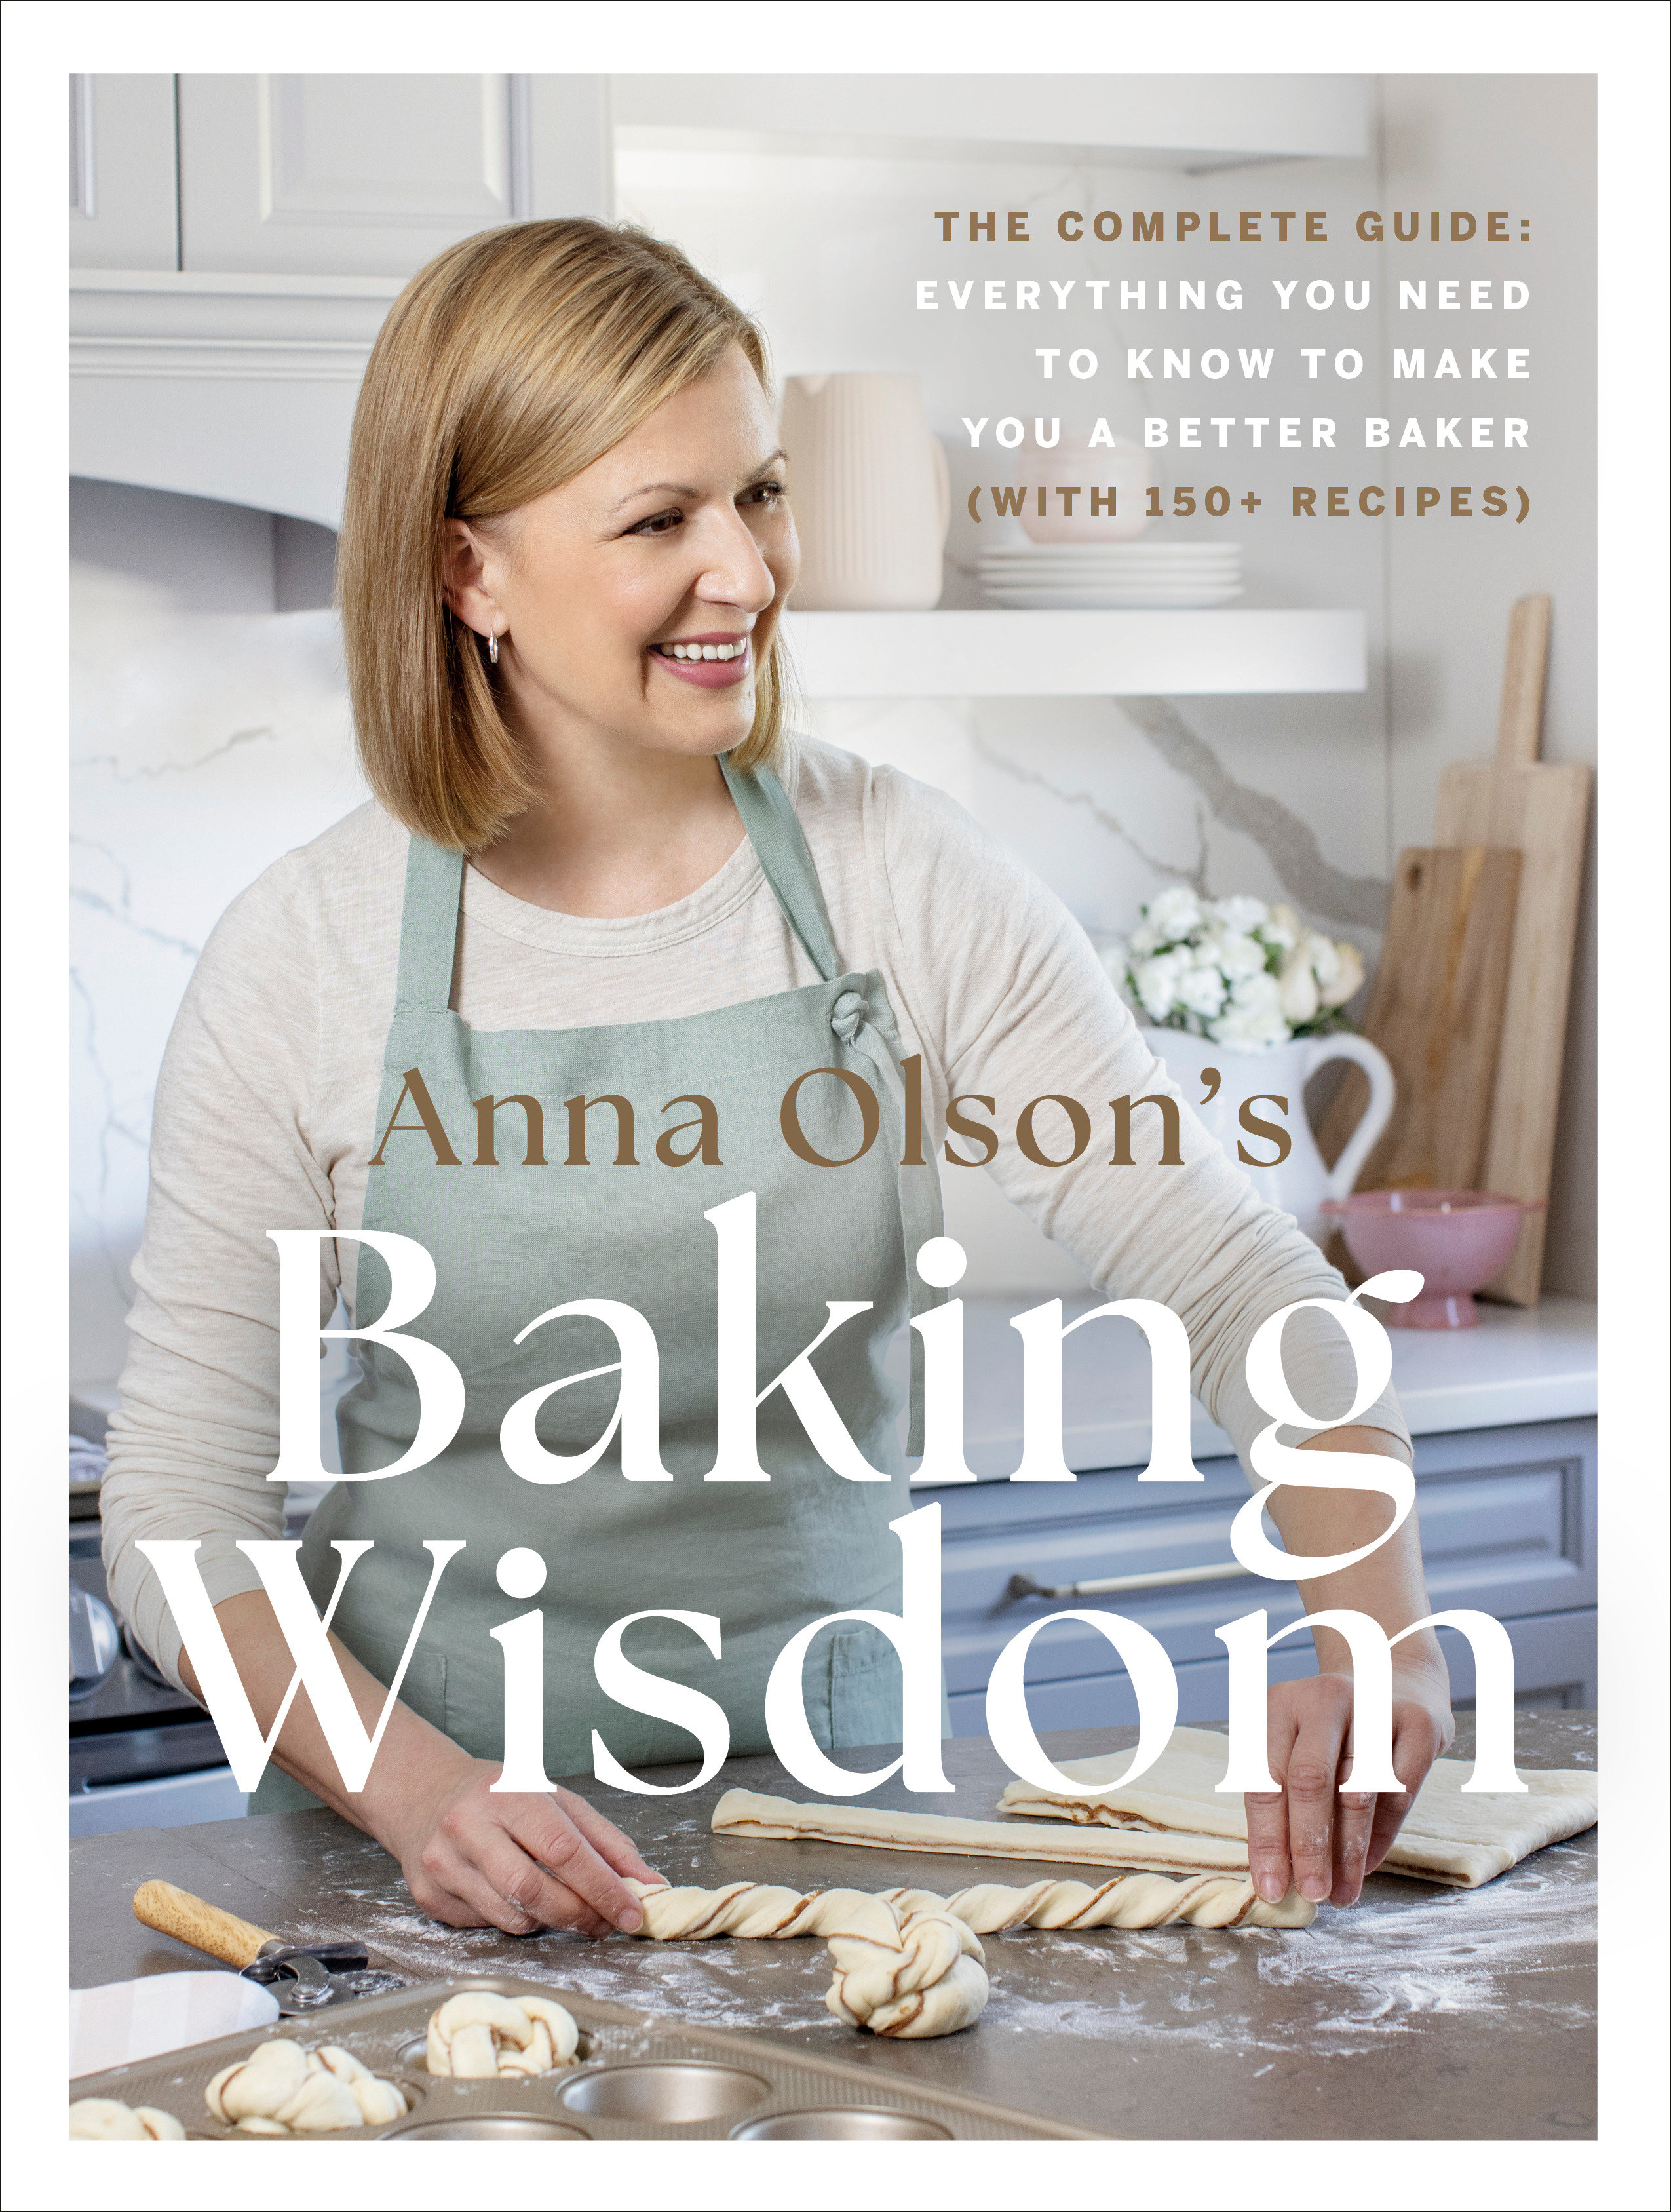 Anna Olson's Baking Wisdom The Complete Guide: Everything You Need to Know to Make You a Better Baker (with 150+ Recipes)